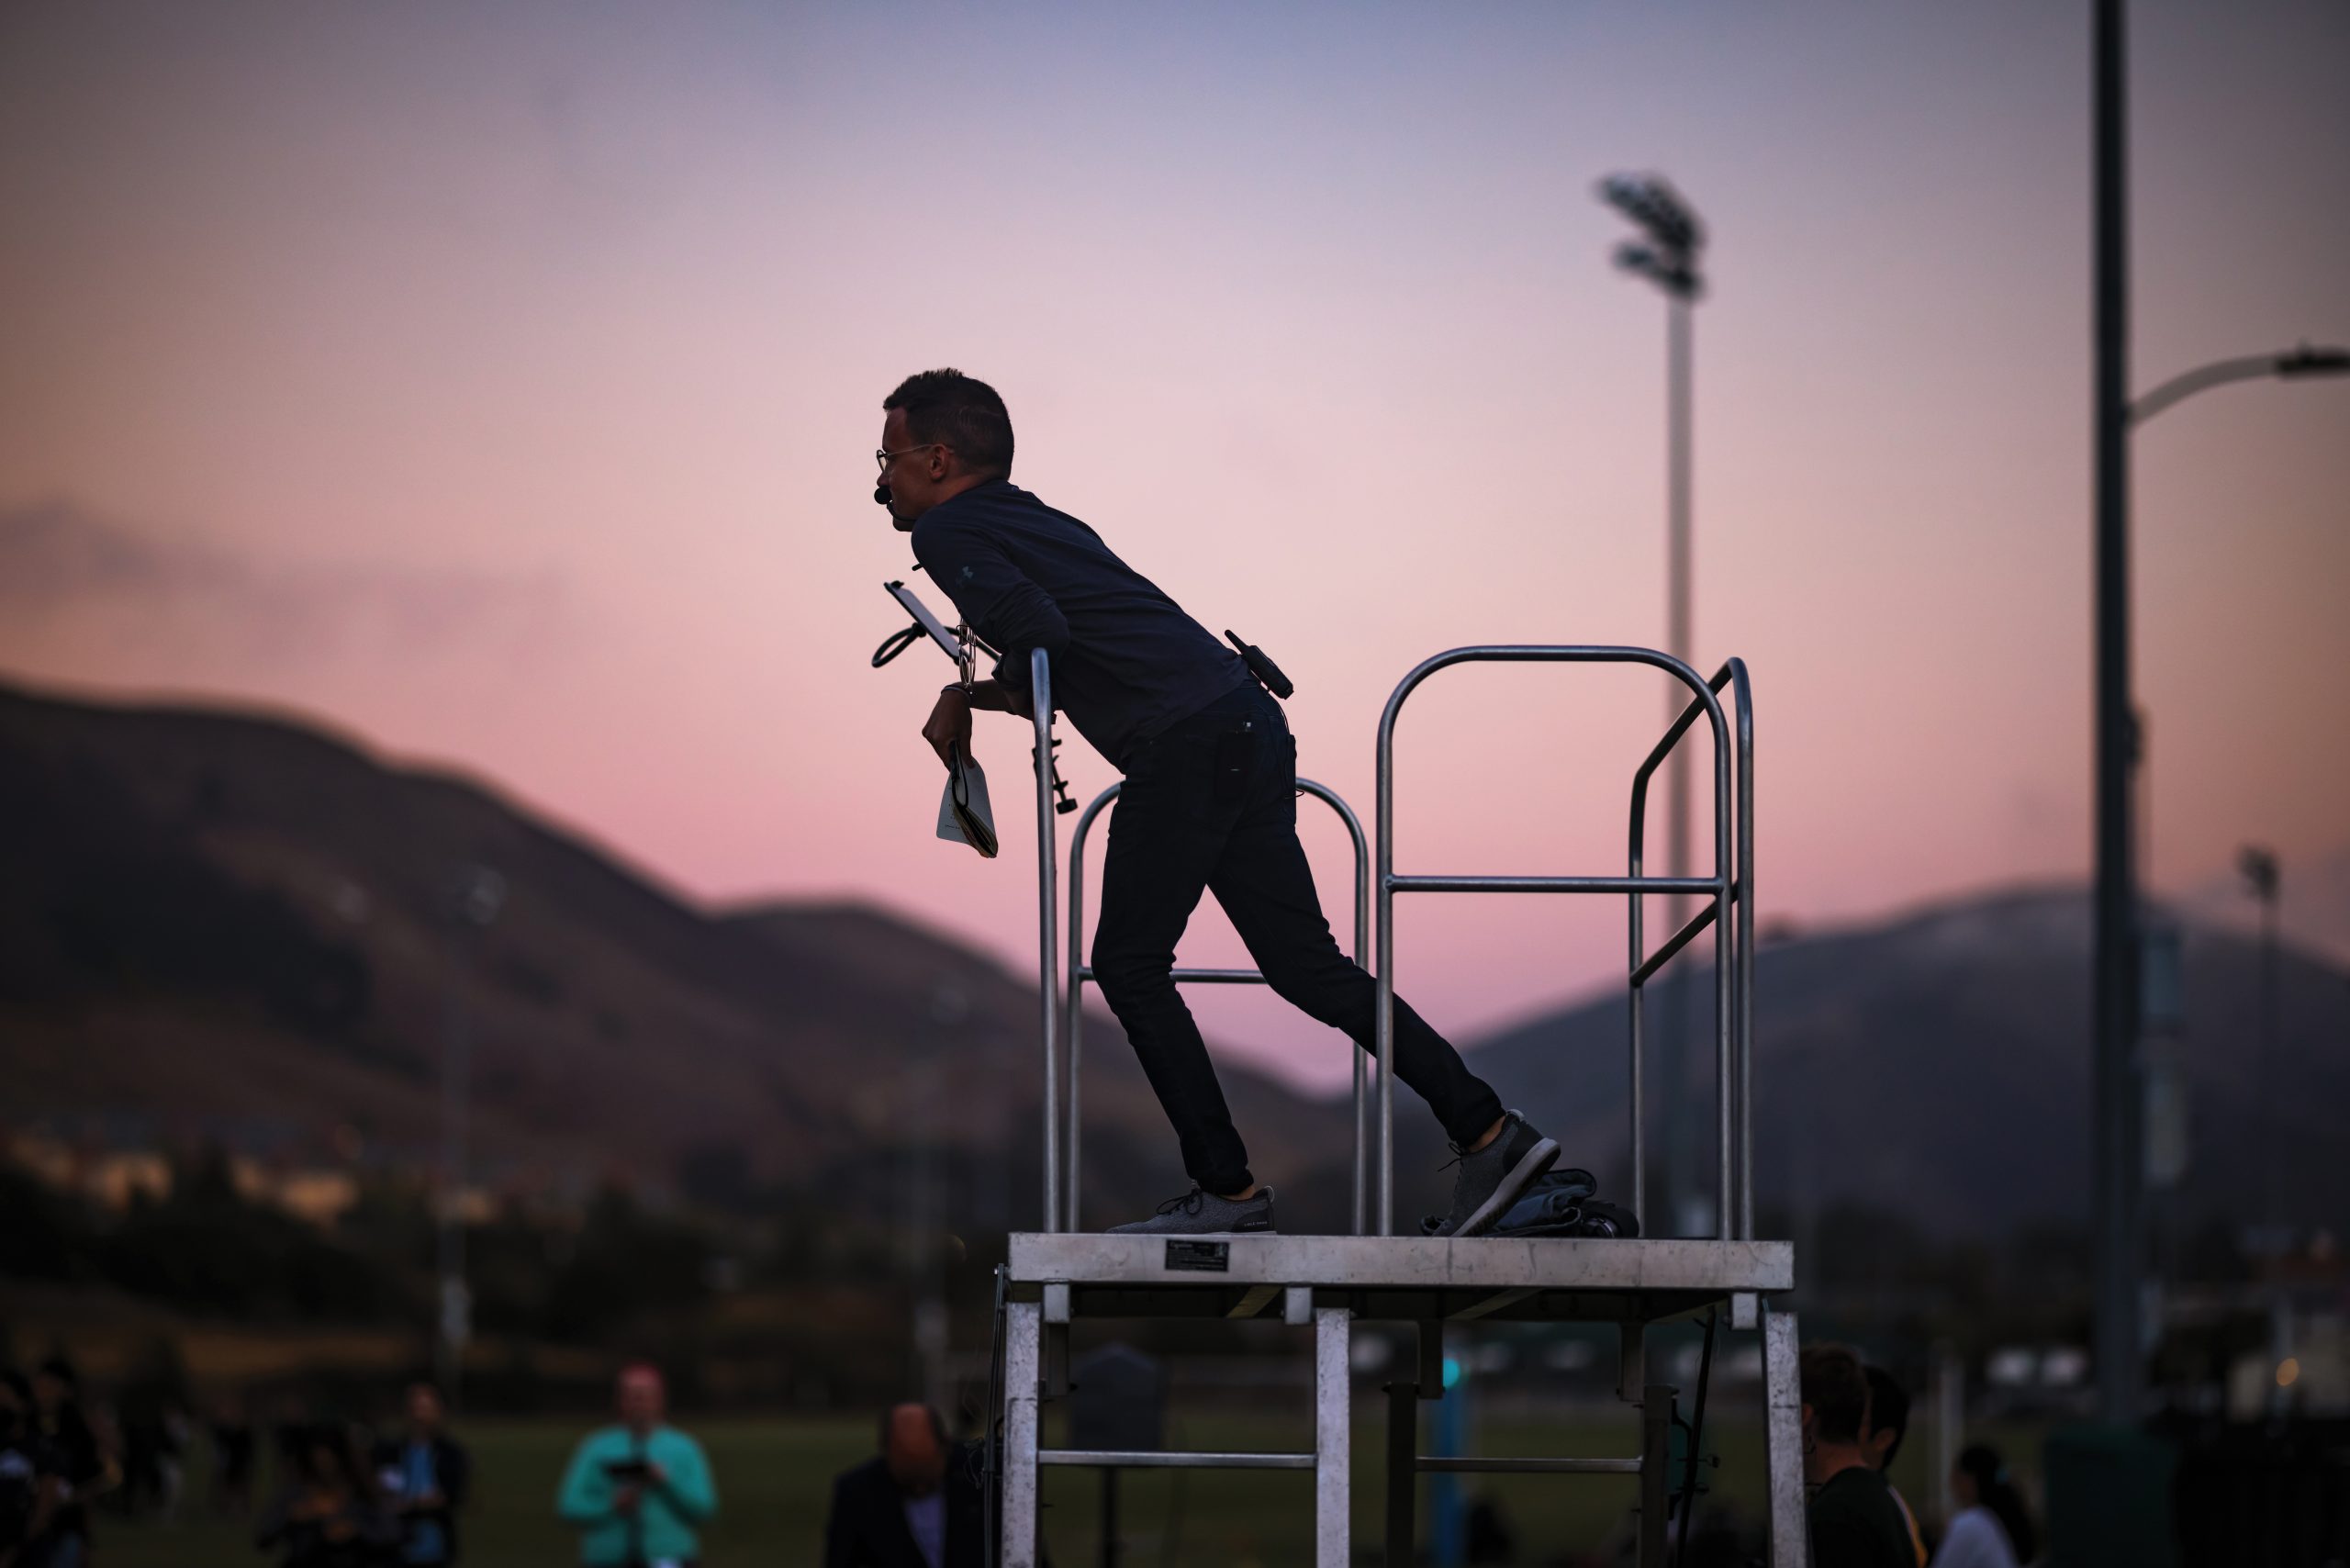 Silhouetted against the sunrise, band director Nick Waldron stands on a riser at the Mustang Band below